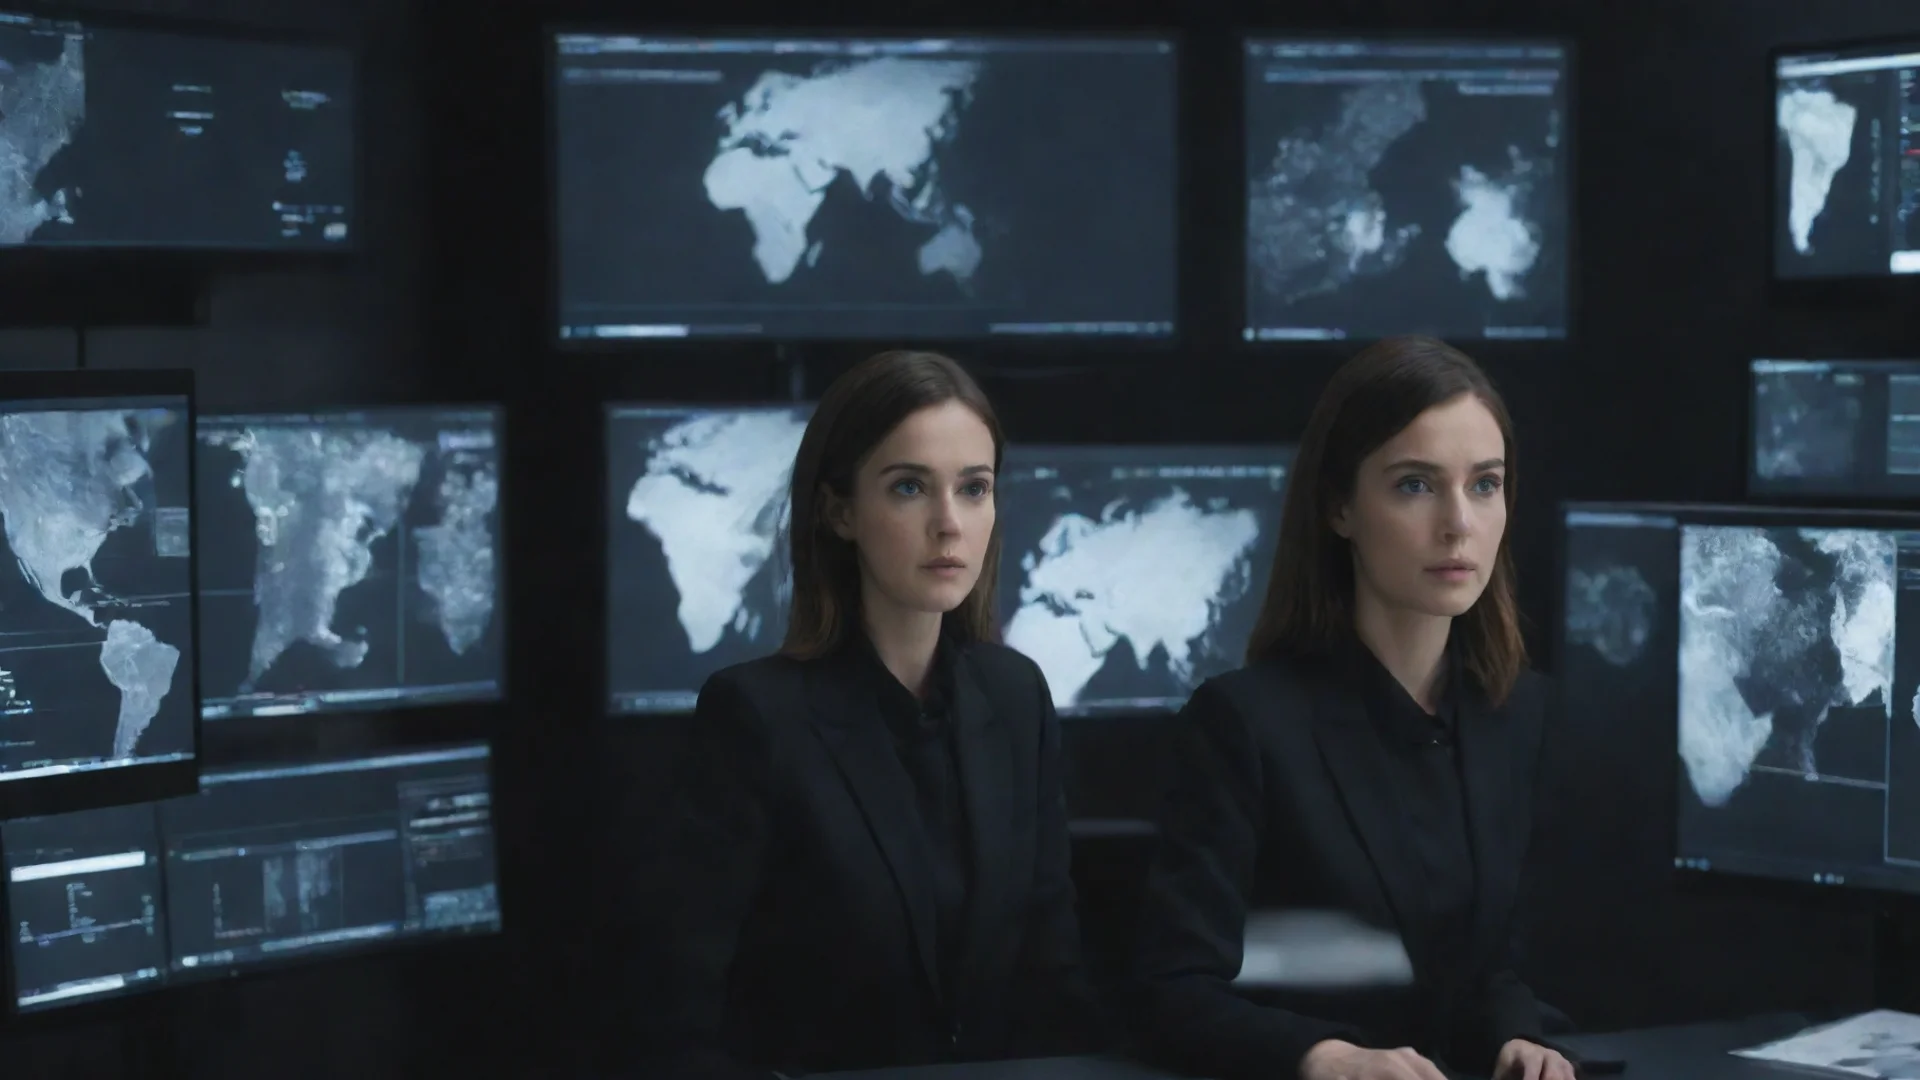 amazing image of a multi screen desktop with ai hollowgram images being operated by an lady agent in  a black suit awesome portrait 2 wide